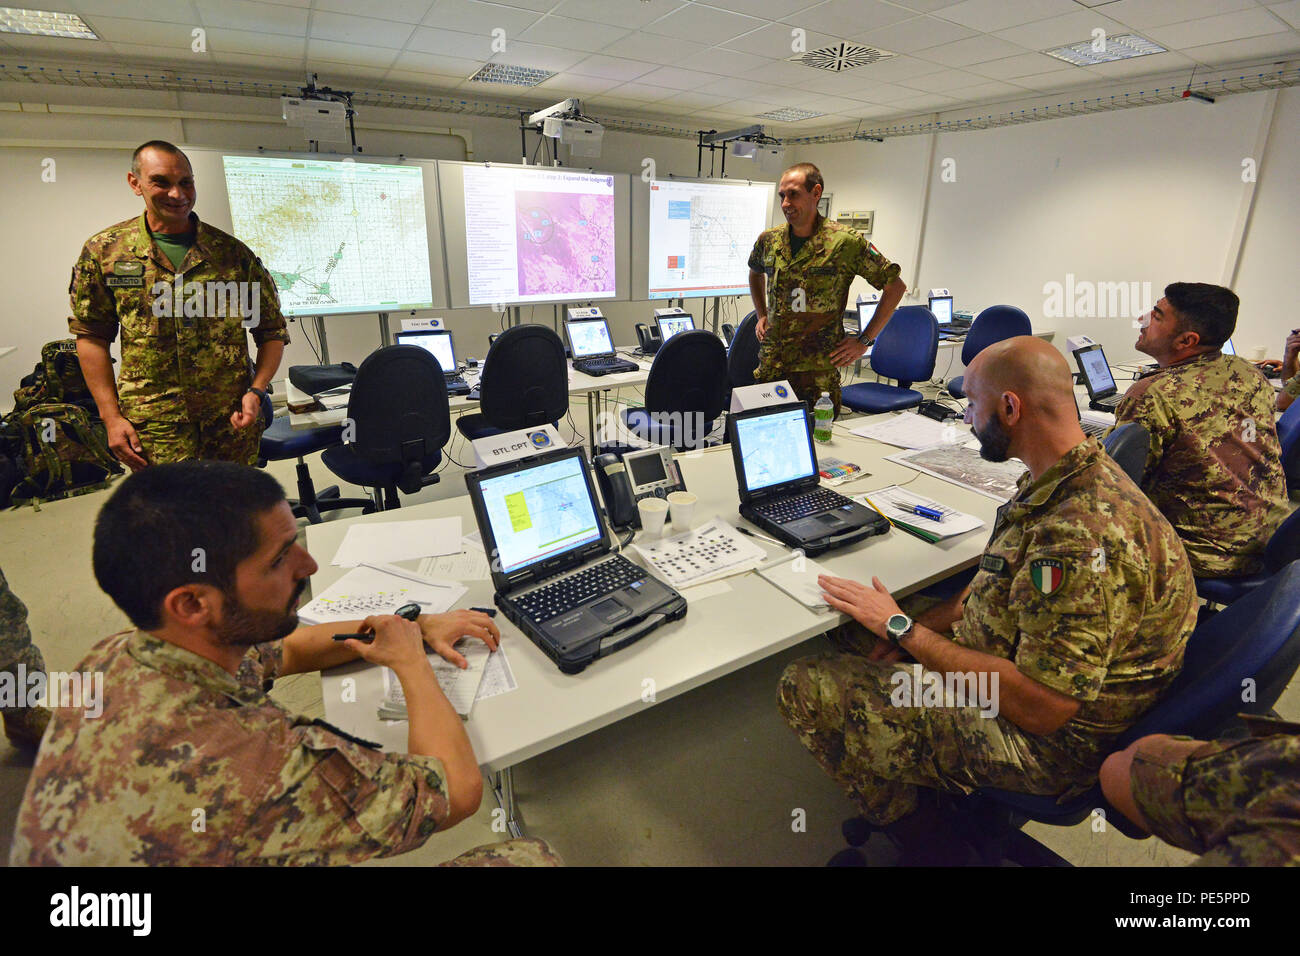 Italian soldiers of the 183 Reggimento Paracadutisti Brigata Folgore Pistoia participate in NIE 16.1 (Network Integration Evaluation 16.1) exercise at Caserma Ederle Vicenza, Italy, Sept. 28, 2015. The NIE 16.1 is a multi-nation exercise designed to increase interoperability and communication between U.S. and NATO Friendly Force. (U.S. Army photo by Visual Information Specialist Paolo Bovo/released) Stock Photo